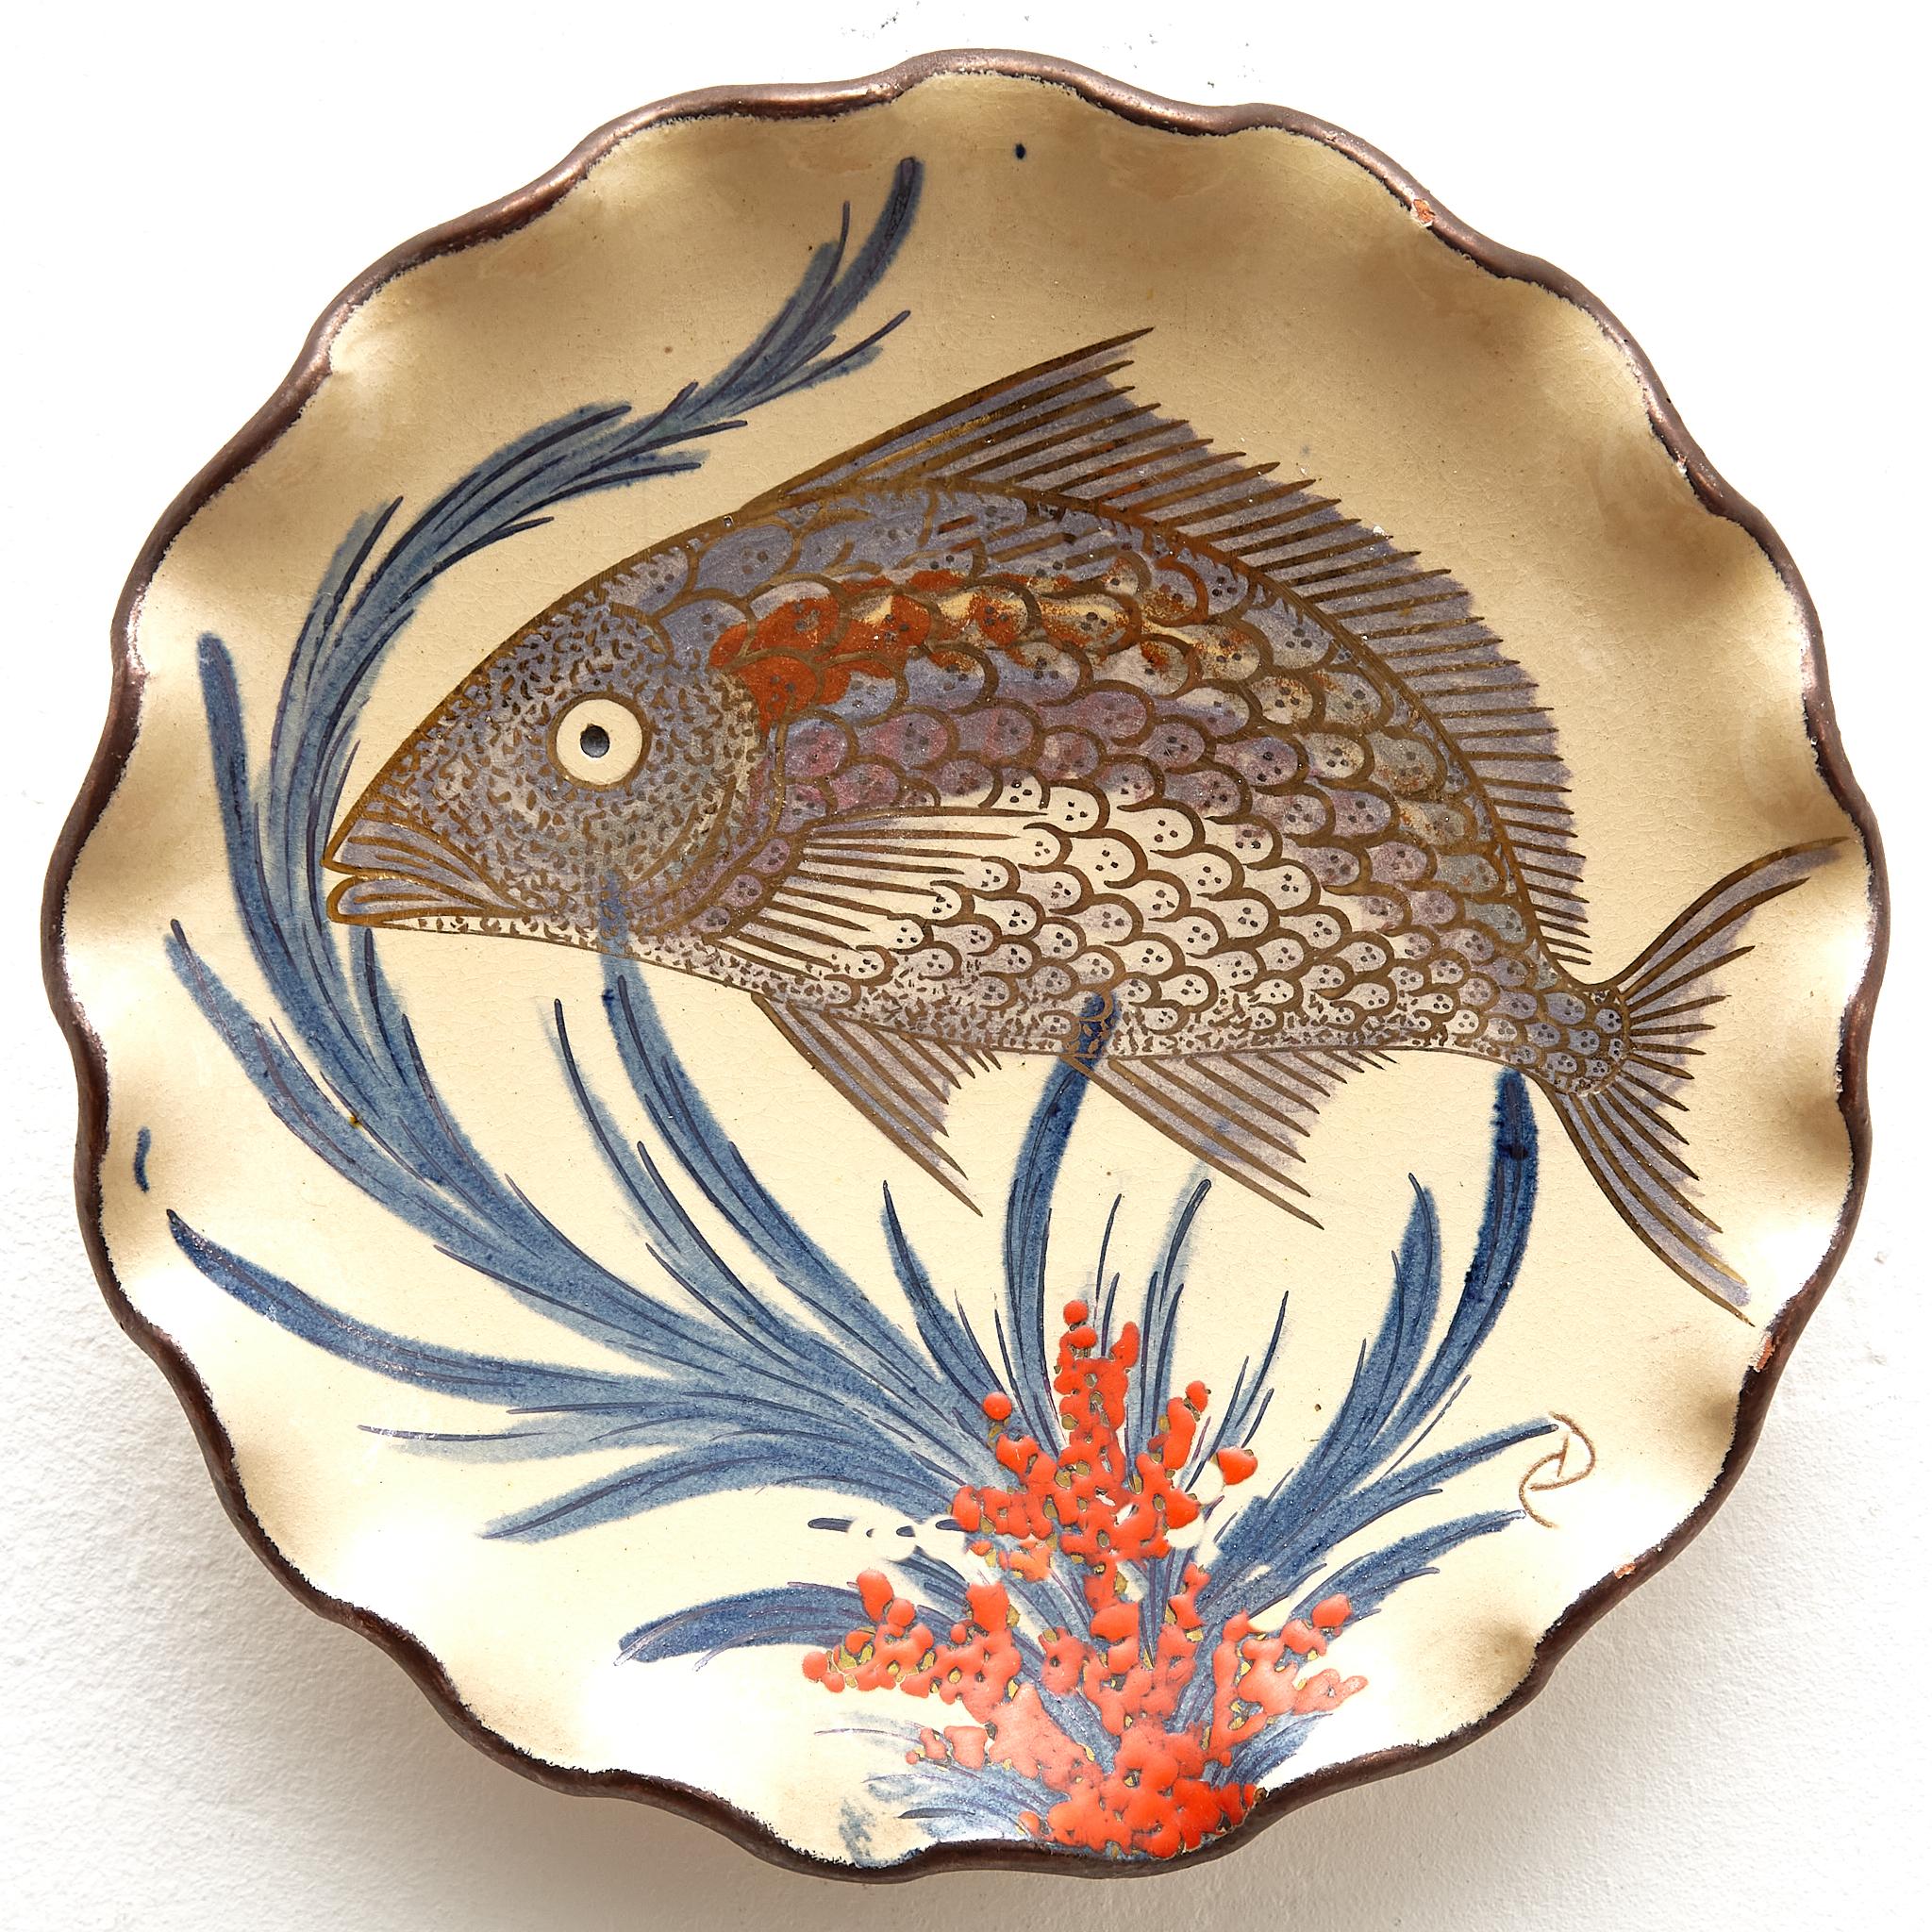 Mid-20th Century Ceramic Traditional Hand Painted Plate by Catalan Artist Diaz COSTA, circa 1960